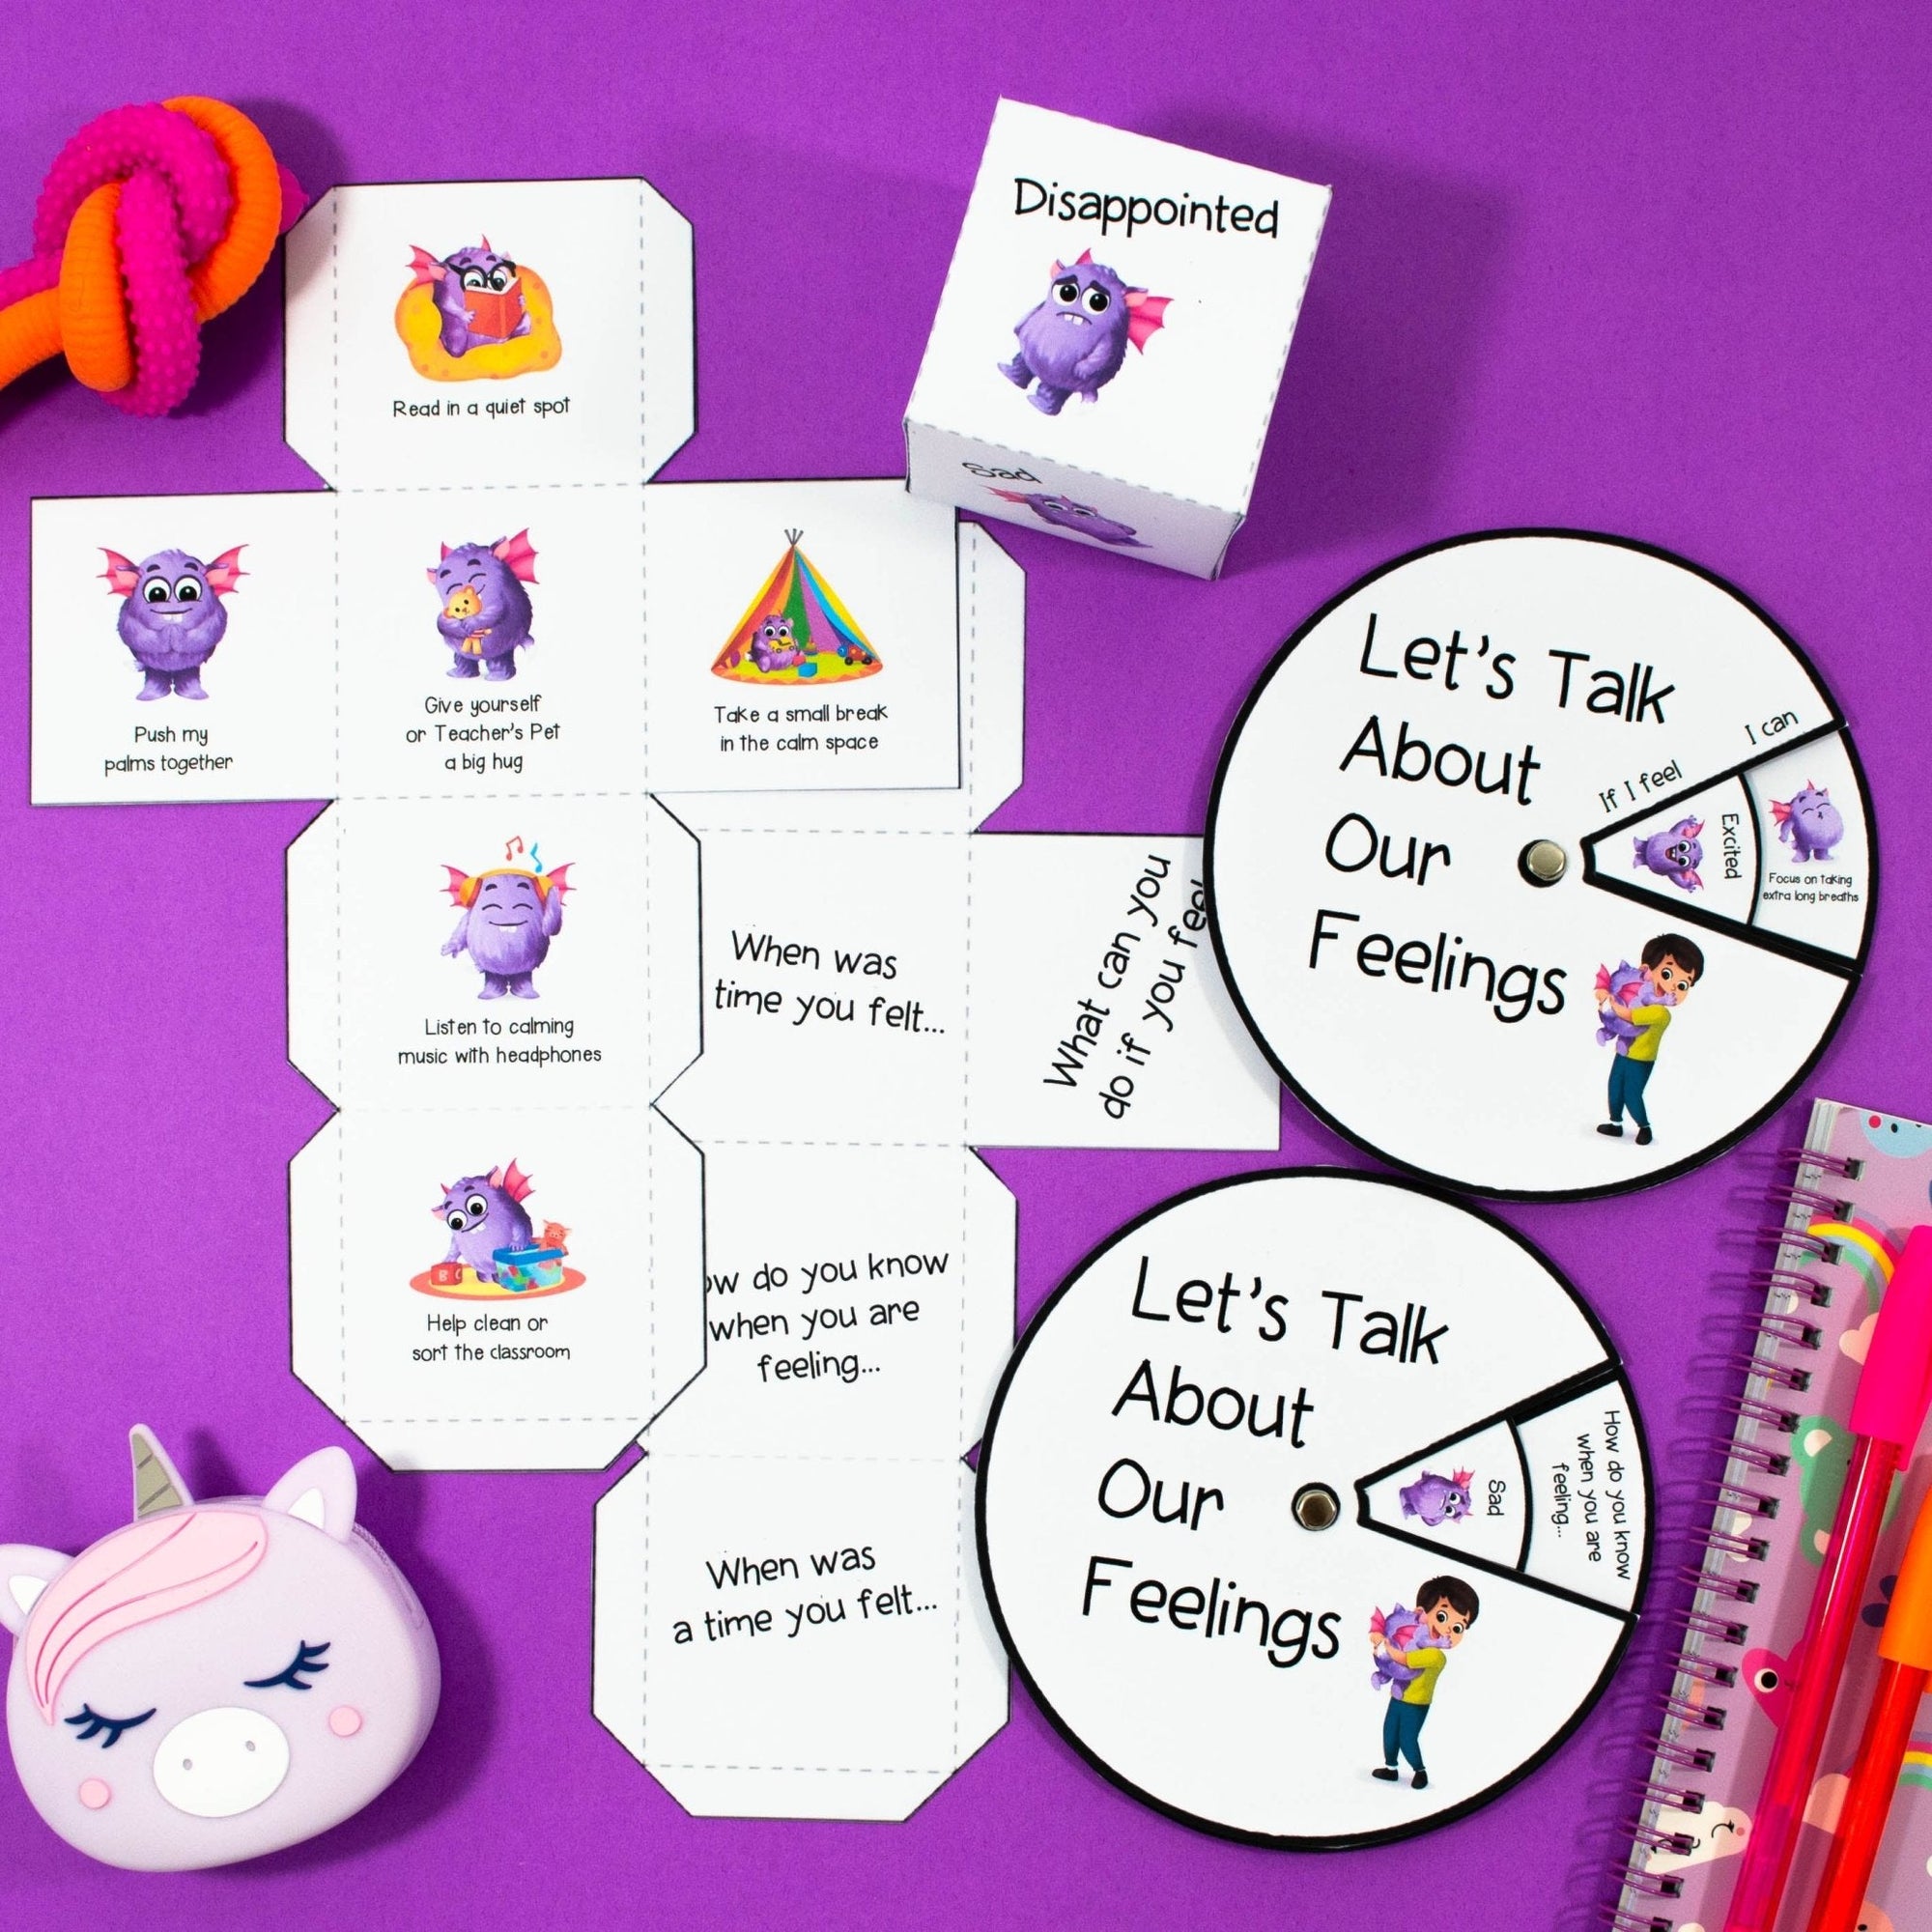 Feelings & Emotions - Dice & Spinners - Discussion Starters & Calming Strategies - Your Teacher's Pet Creature